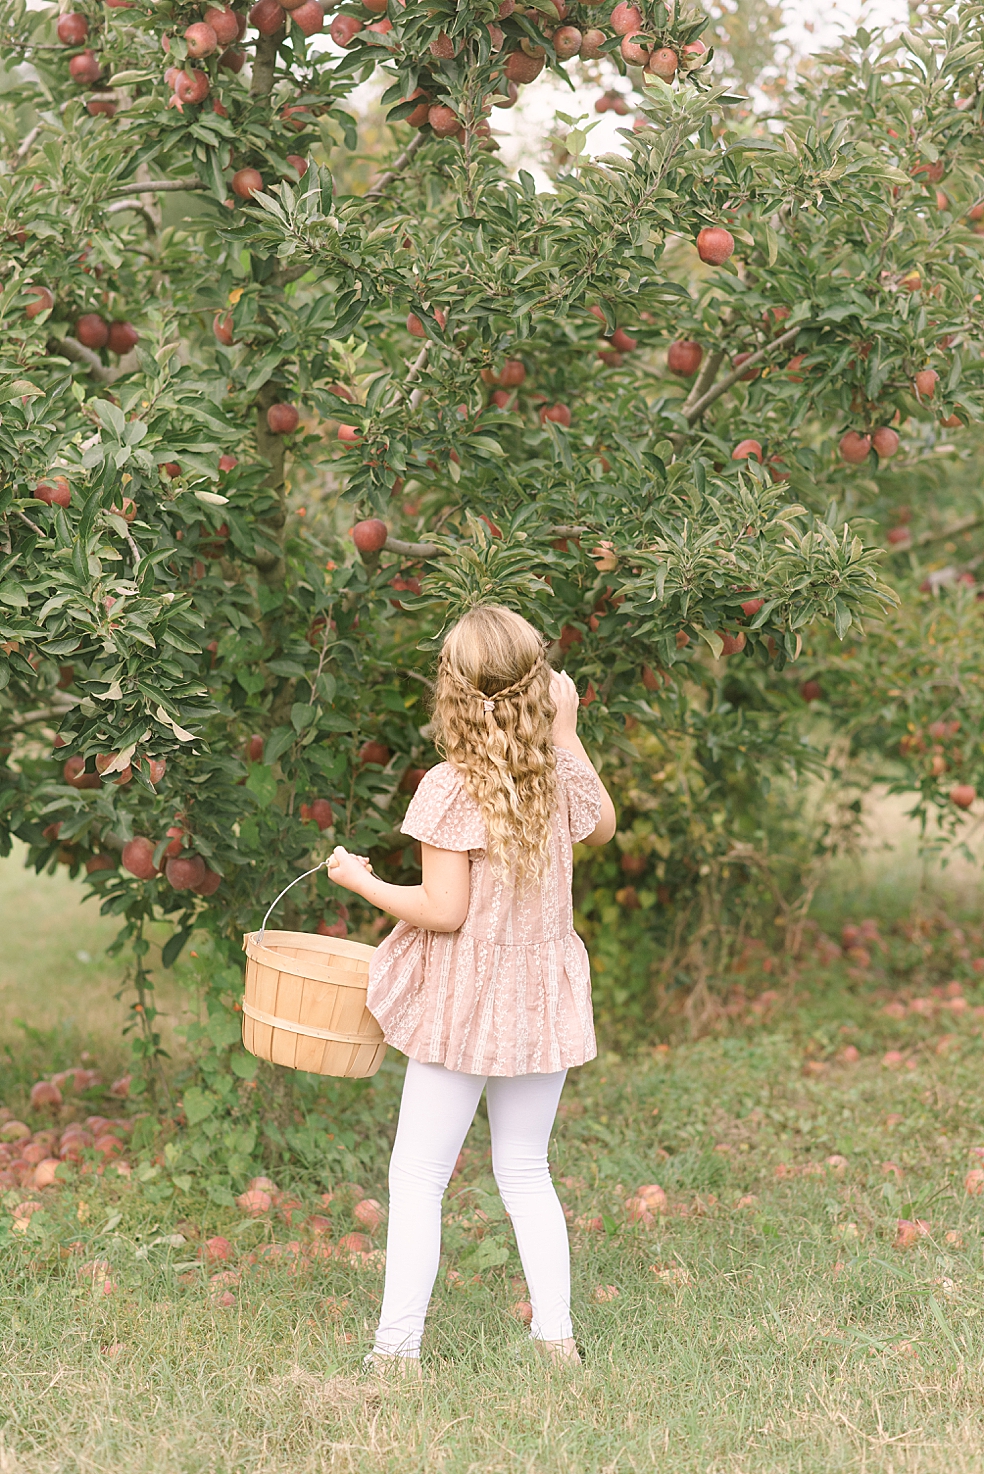 Young girl in peach top picking apples at Scotts Orchard | Photo by Jessica Lee Photography